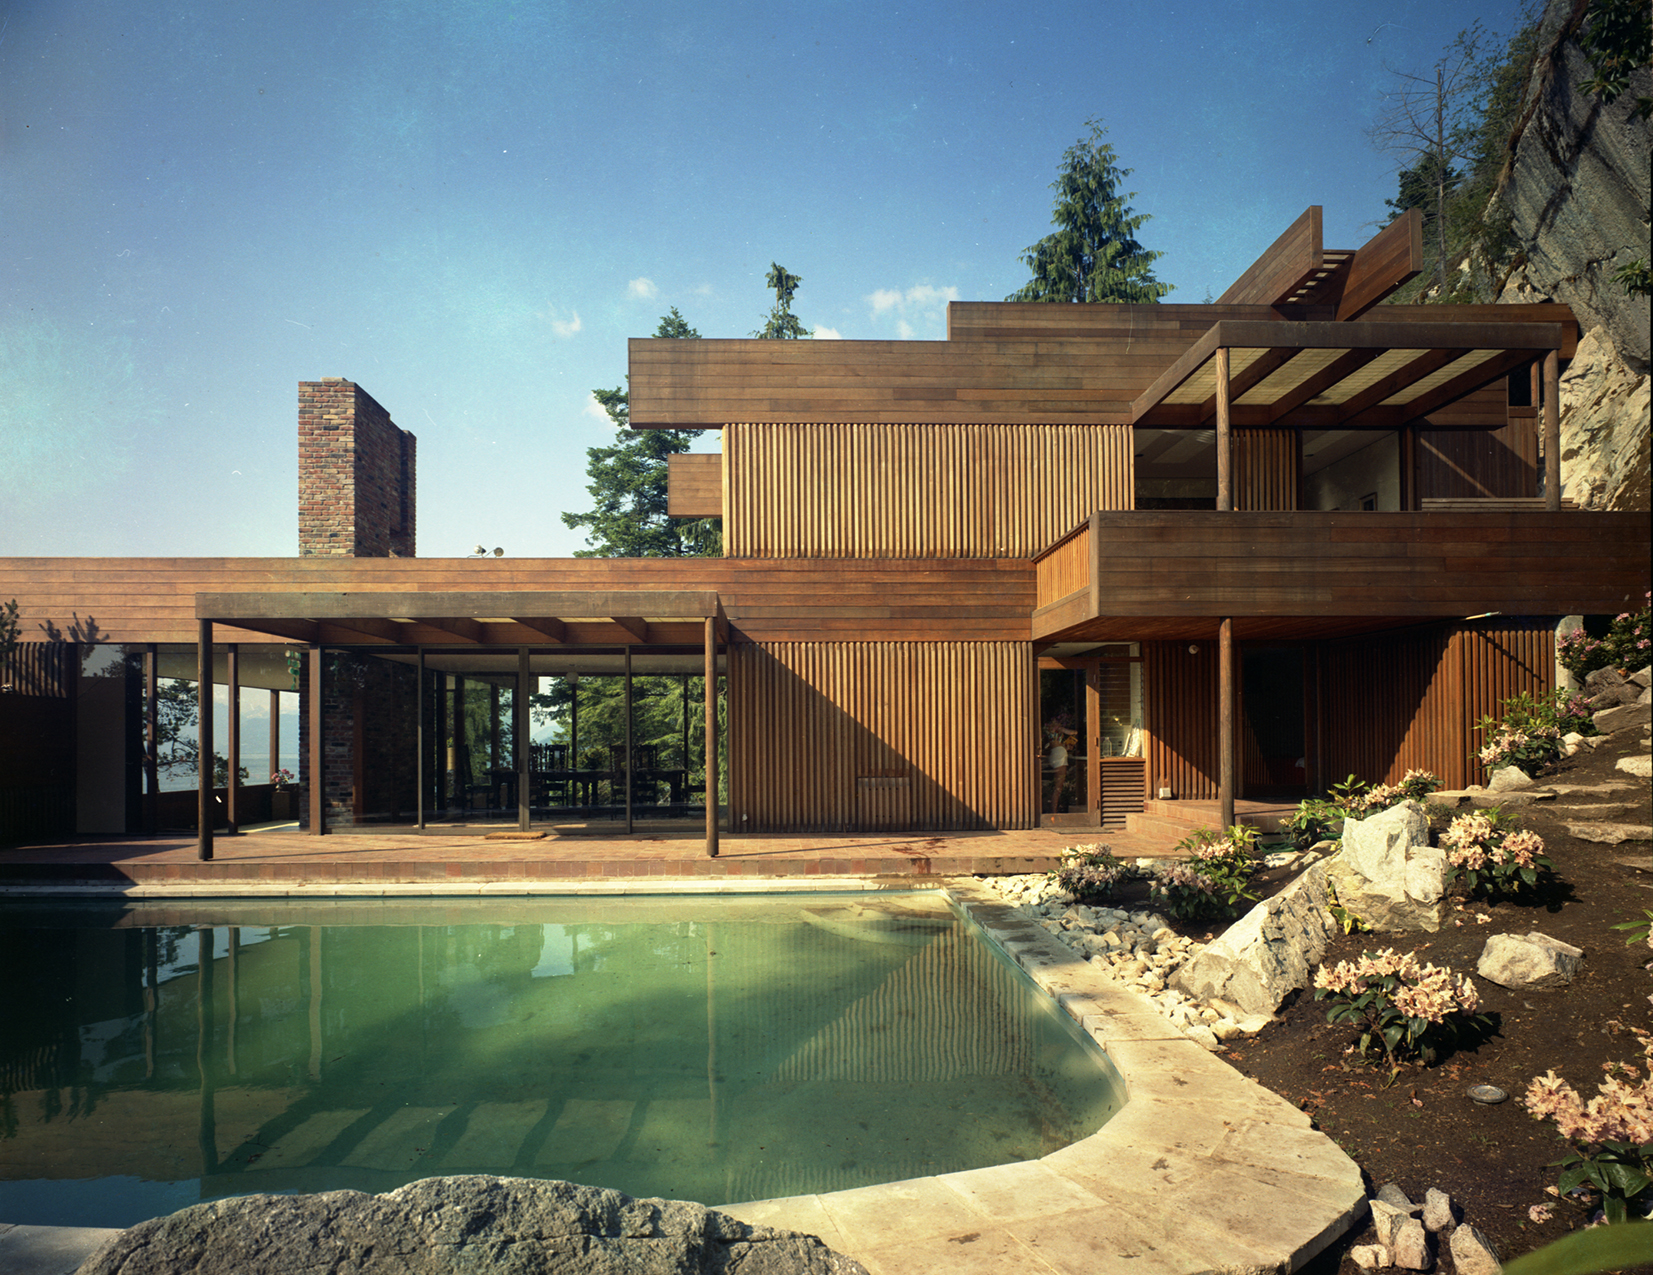 Graham Residence, Erickson/ Massey Architects, 1962. Photo: John Fulker, 1967. Collection of West Vancouver Art Museum.